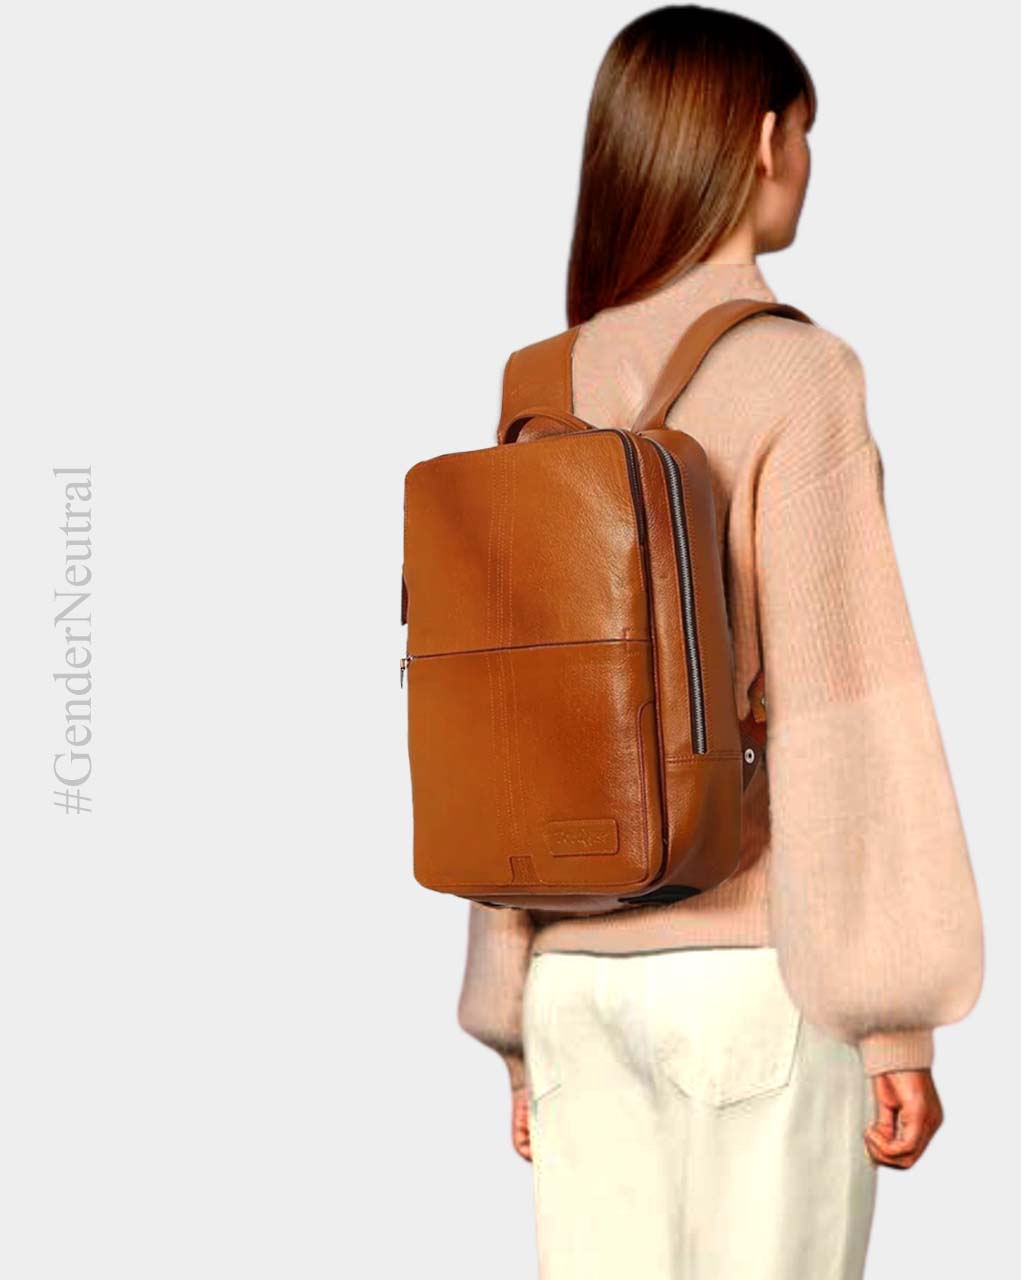 Marco - The Backpack - Light Brown - Tortoise  